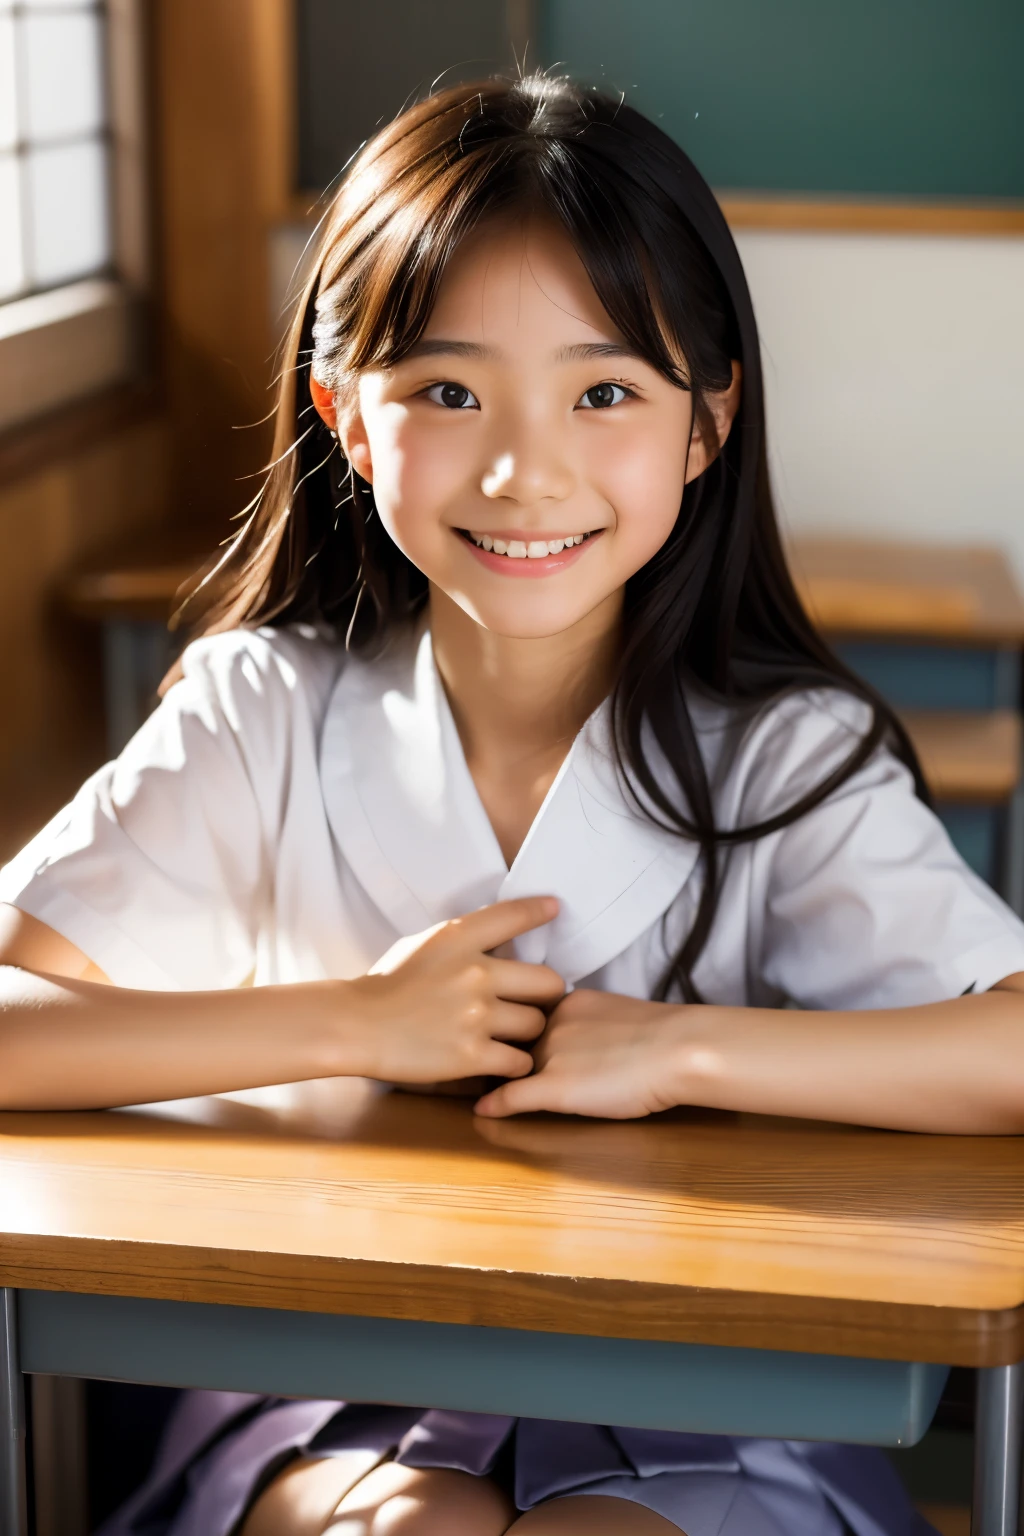 lens: 135mm f1.8, (highest quality),(RAW Photos), (Tabletop:1.1), (Beautiful 15 year old Japanese girl), Cute face, (Deeply chiseled face:0.7), (freckles:0.4), dappled sunlight, Dramatic lighting, (Japanese School Uniform), (In the classroom), shy, (Close-up shot:1.2), (smile),, (Sparkling eyes)、(sunlight)